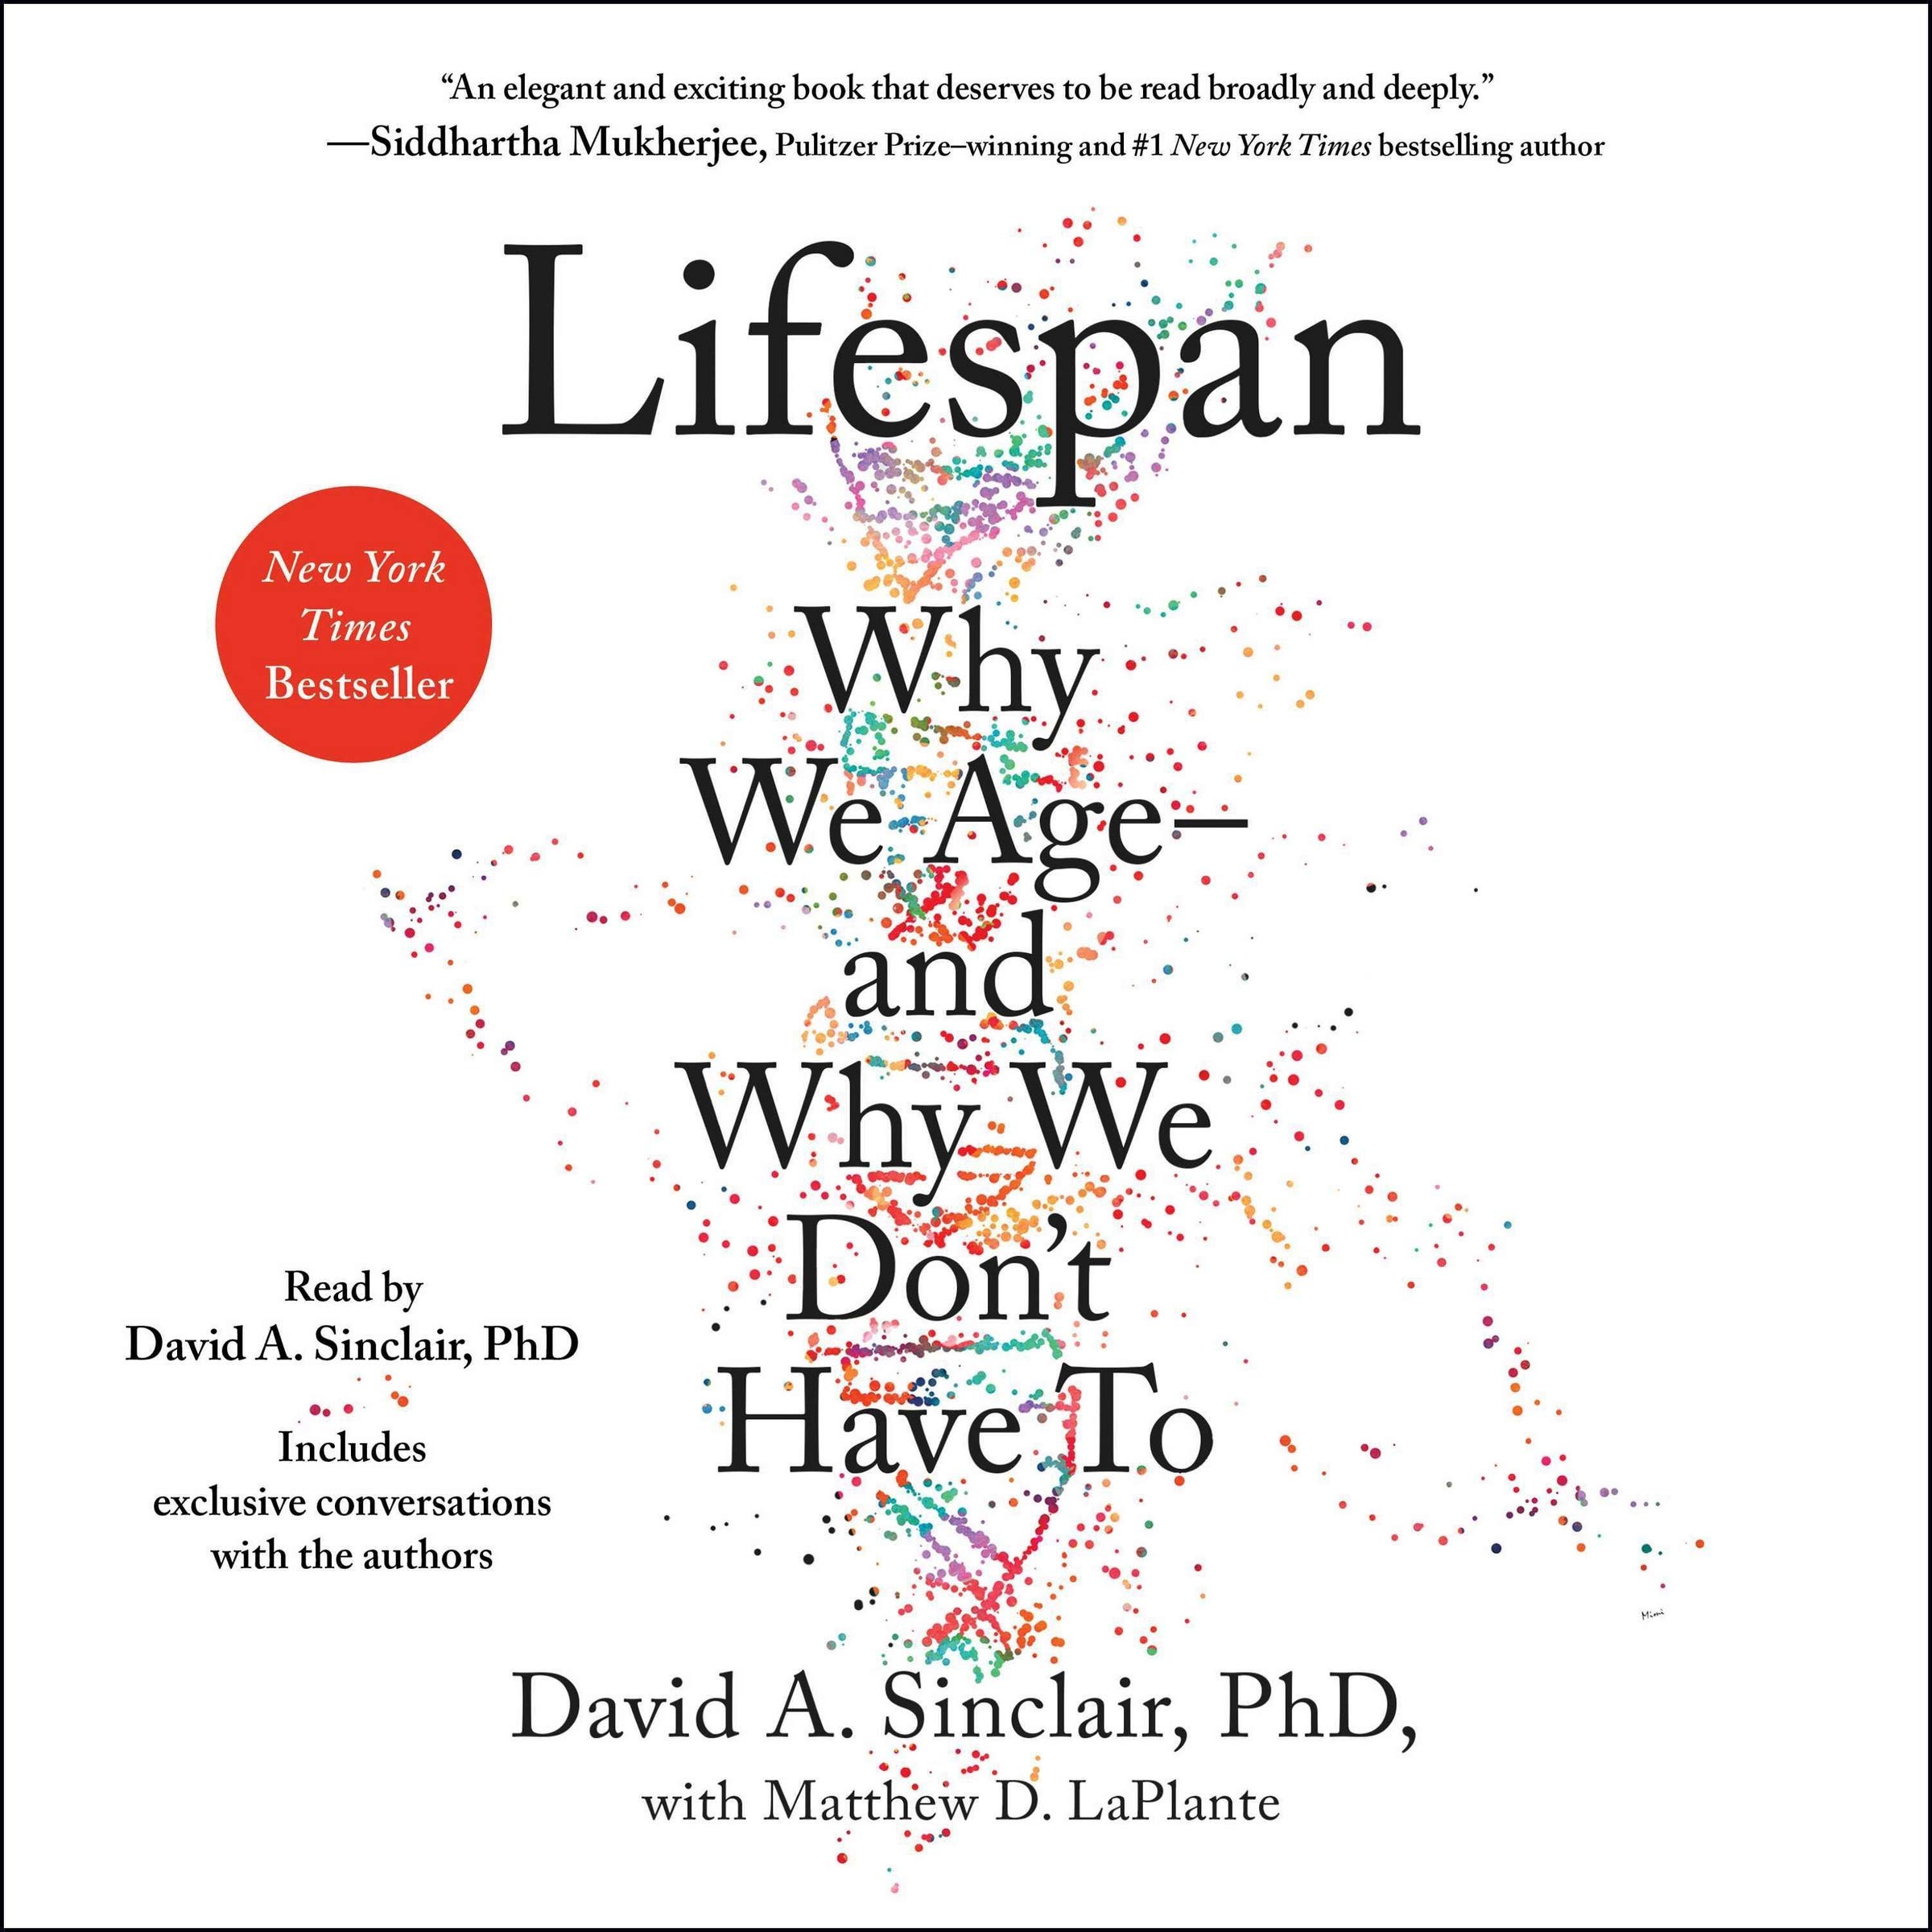 David Sinclair Phd - Lifespan: Why We Age and Why We Don’t Have To